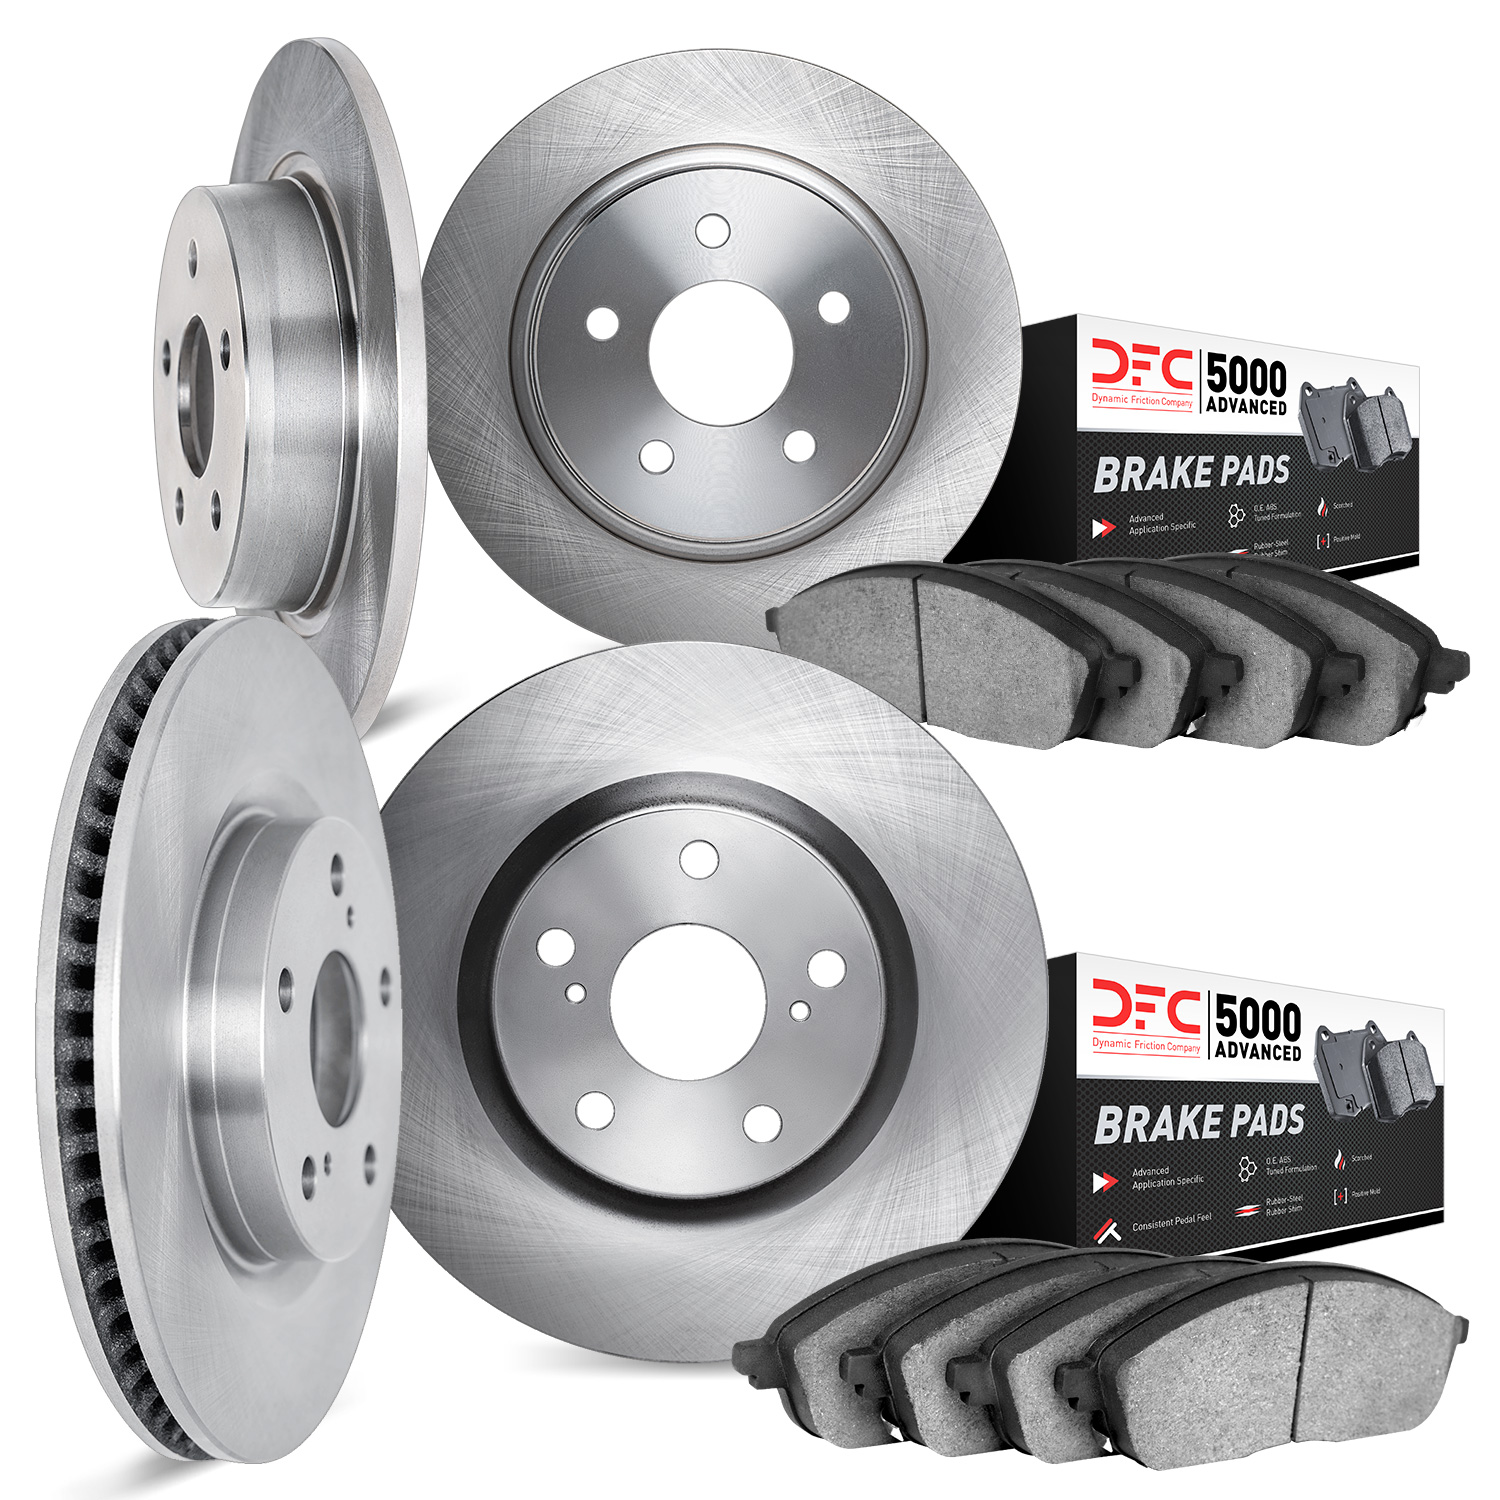 6504-40891 Brake Rotors w/5000 Advanced Brake Pads Kit, 2002-2006 Multiple Makes/Models, Position: Front and Rear